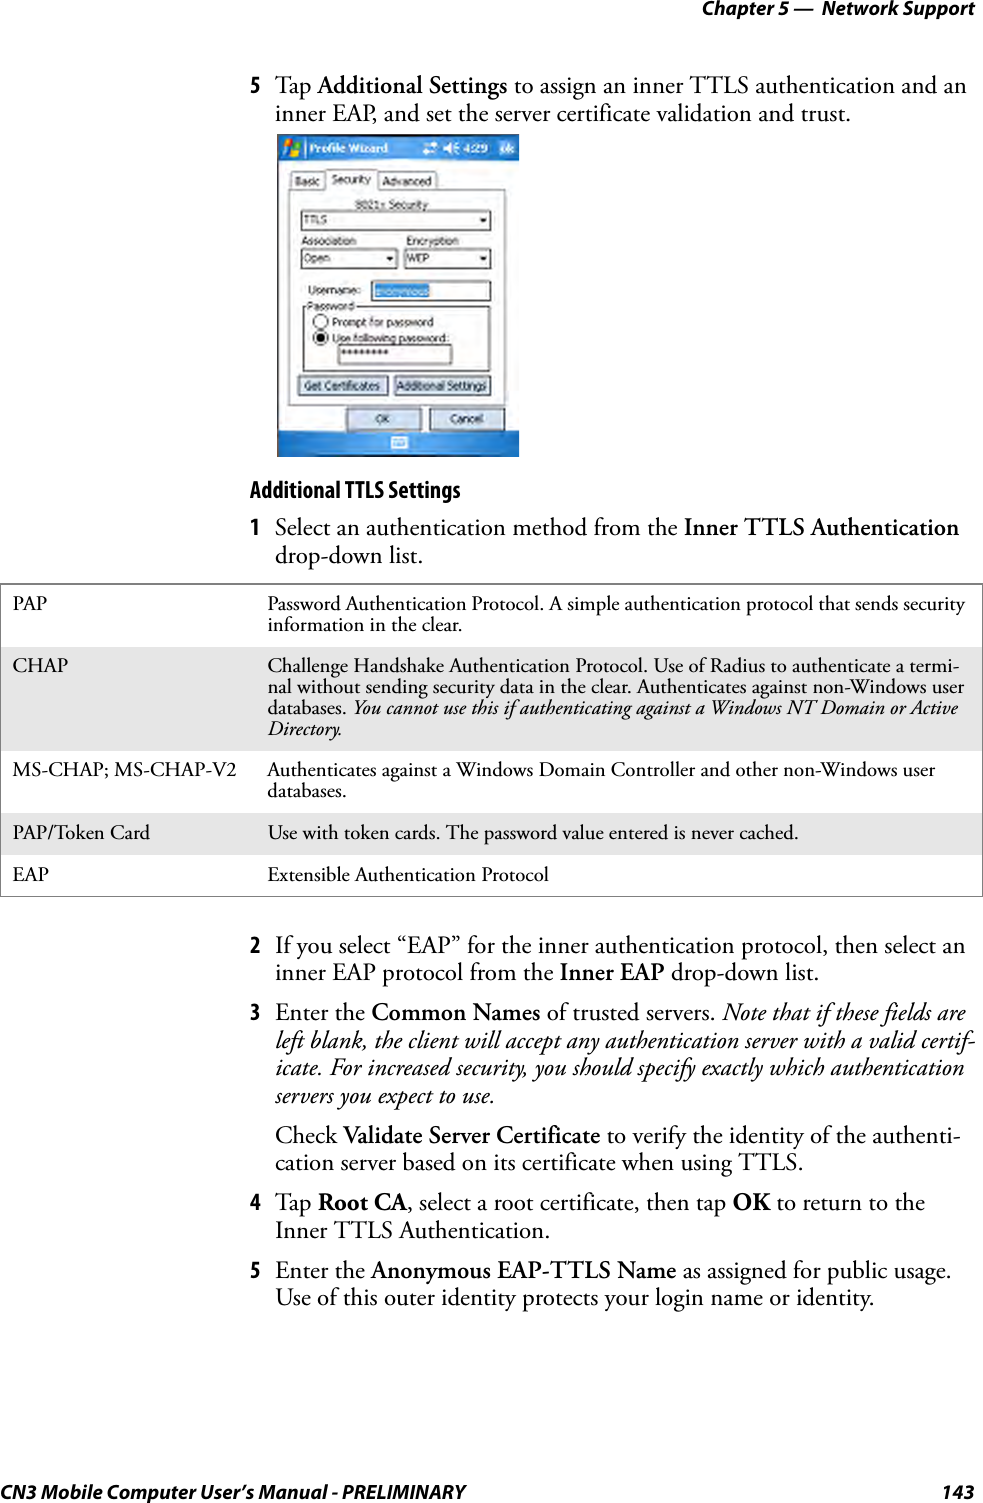 Chapter 5 —  Network SupportCN3 Mobile Computer User’s Manual - PRELIMINARY 1435Tap  Additional Settings to assign an inner TTLS authentication and an inner EAP, and set the server certificate validation and trust.Additional TTLS Settings1Select an authentication method from the Inner TTLS Authentication drop-down list.2If you select “EAP” for the inner authentication protocol, then select an inner EAP protocol from the Inner EAP drop-down list.3Enter the Common Names of trusted servers. Note that if these fields are left blank, the client will accept any authentication server with a valid certif-icate. For increased security, you should specify exactly which authentication servers you expect to use.Check Validate Server Certificate to verify the identity of the authenti-cation server based on its certificate when using TTLS.4Tap  Root CA, select a root certificate, then tap OK to return to the Inner TTLS Authentication.5Enter the Anonymous EAP-TTLS Name as assigned for public usage. Use of this outer identity protects your login name or identity.PAP Password Authentication Protocol. A simple authentication protocol that sends security information in the clear.CHAP Challenge Handshake Authentication Protocol. Use of Radius to authenticate a termi-nal without sending security data in the clear. Authenticates against non-Windows user databases. You cannot use this if authenticating against a Windows NT Domain or Active Directory.MS-CHAP; MS-CHAP-V2 Authenticates against a Windows Domain Controller and other non-Windows user databases.PAP/Token Card Use with token cards. The password value entered is never cached.EAP Extensible Authentication Protocol